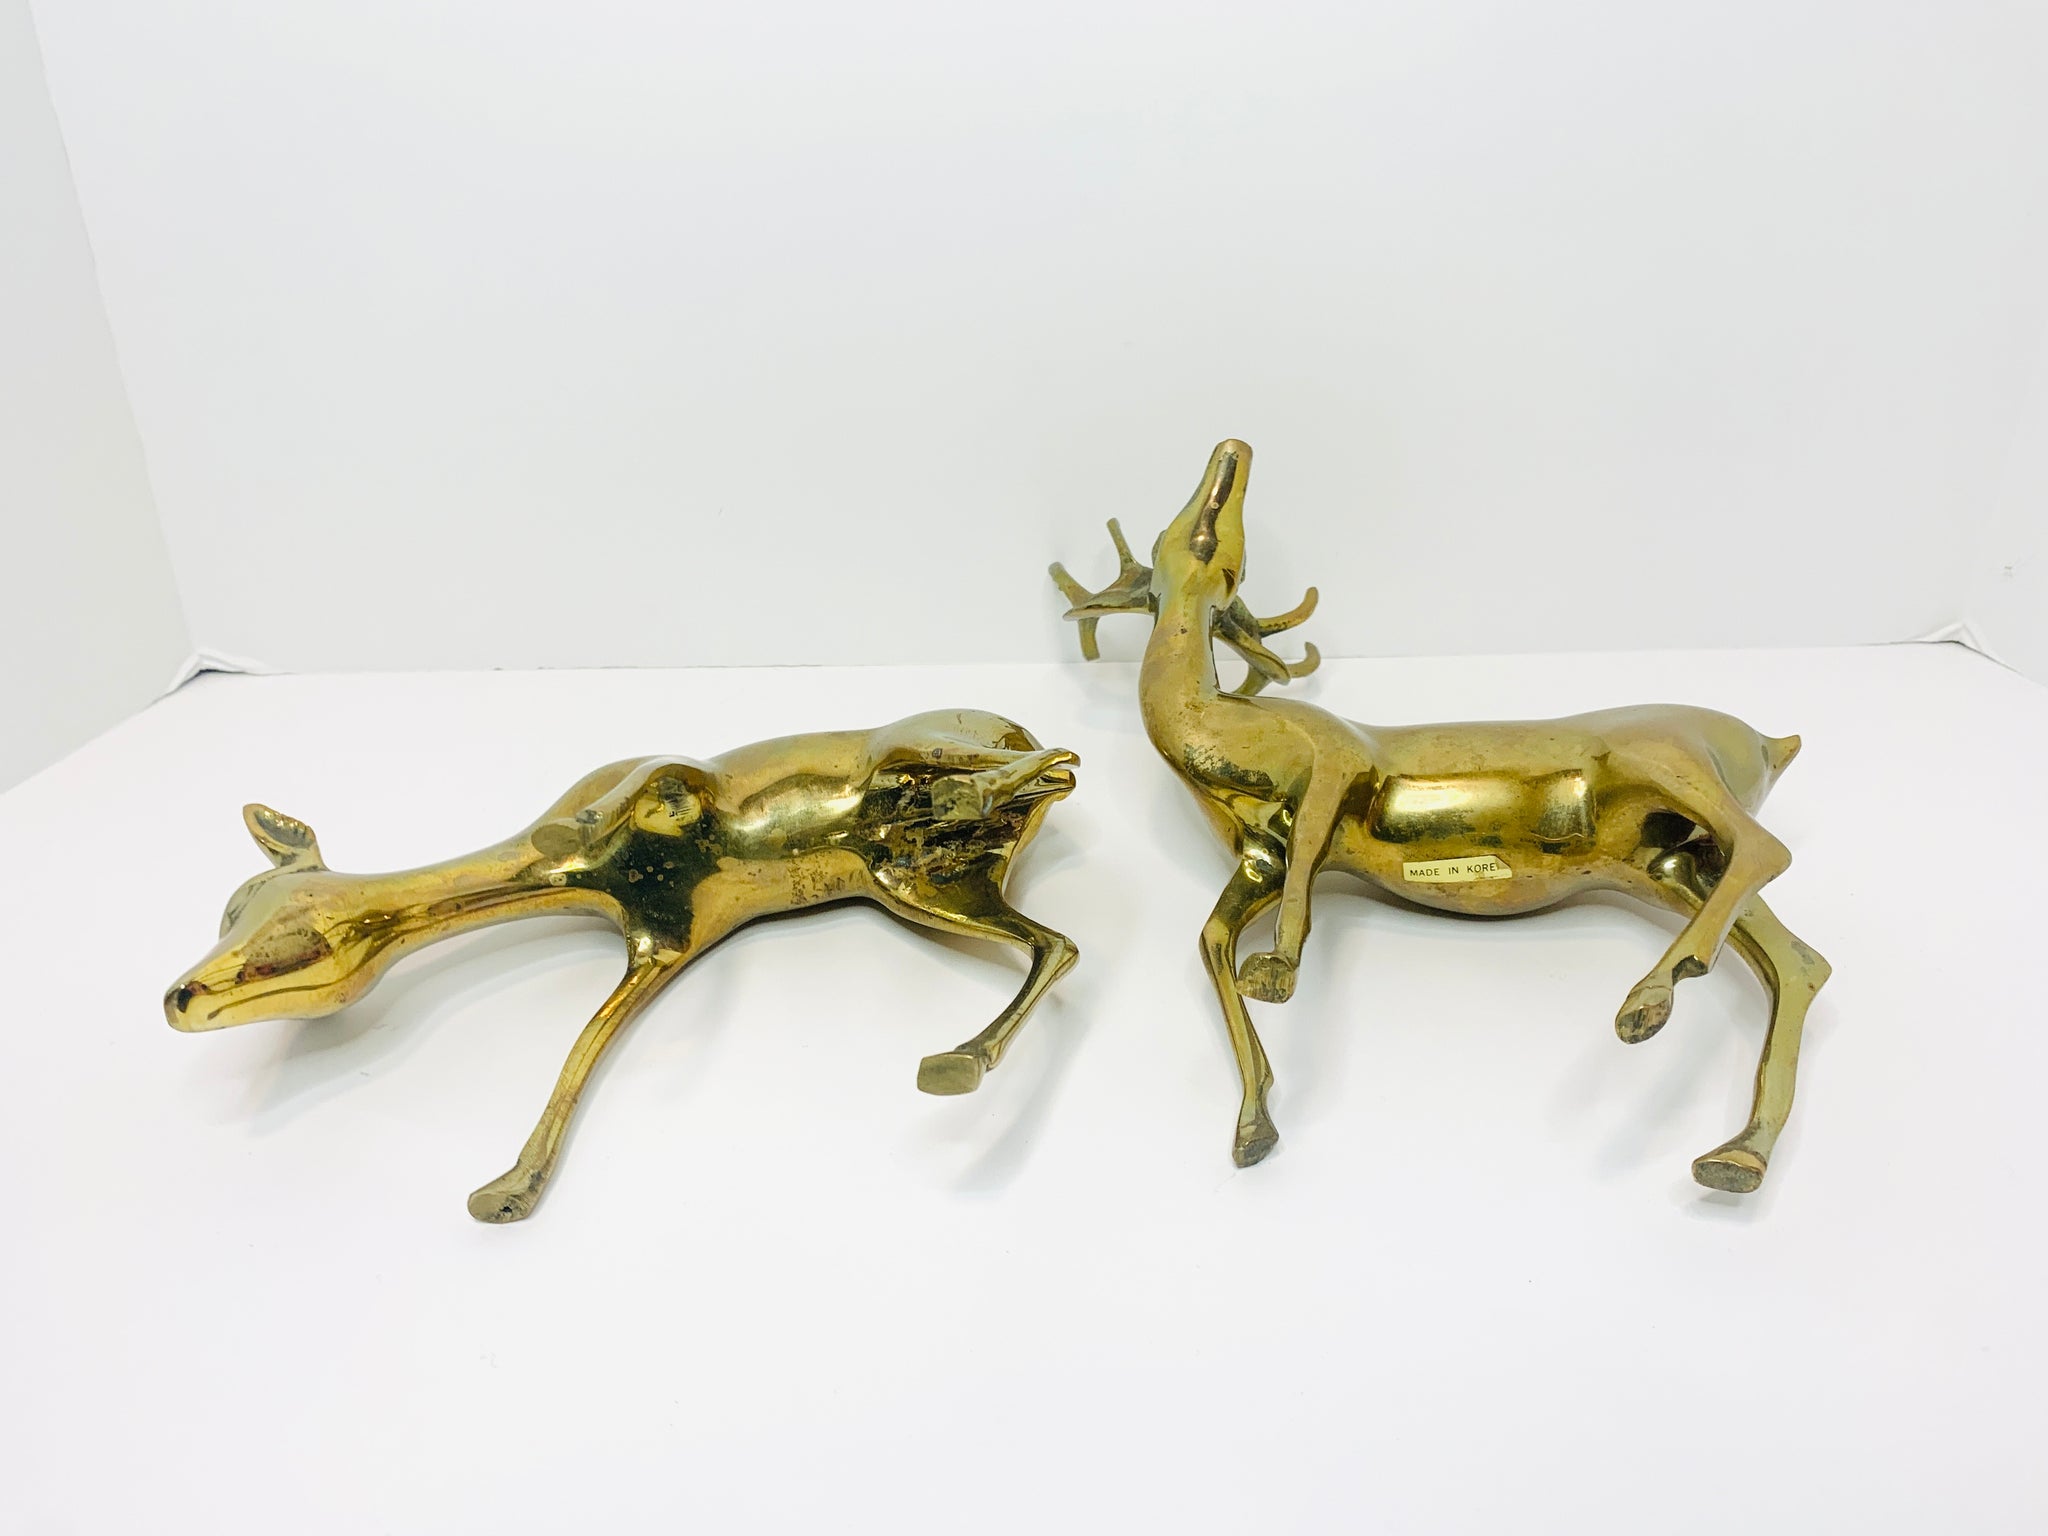 I've always thought these vintage brass deer that you commonly see